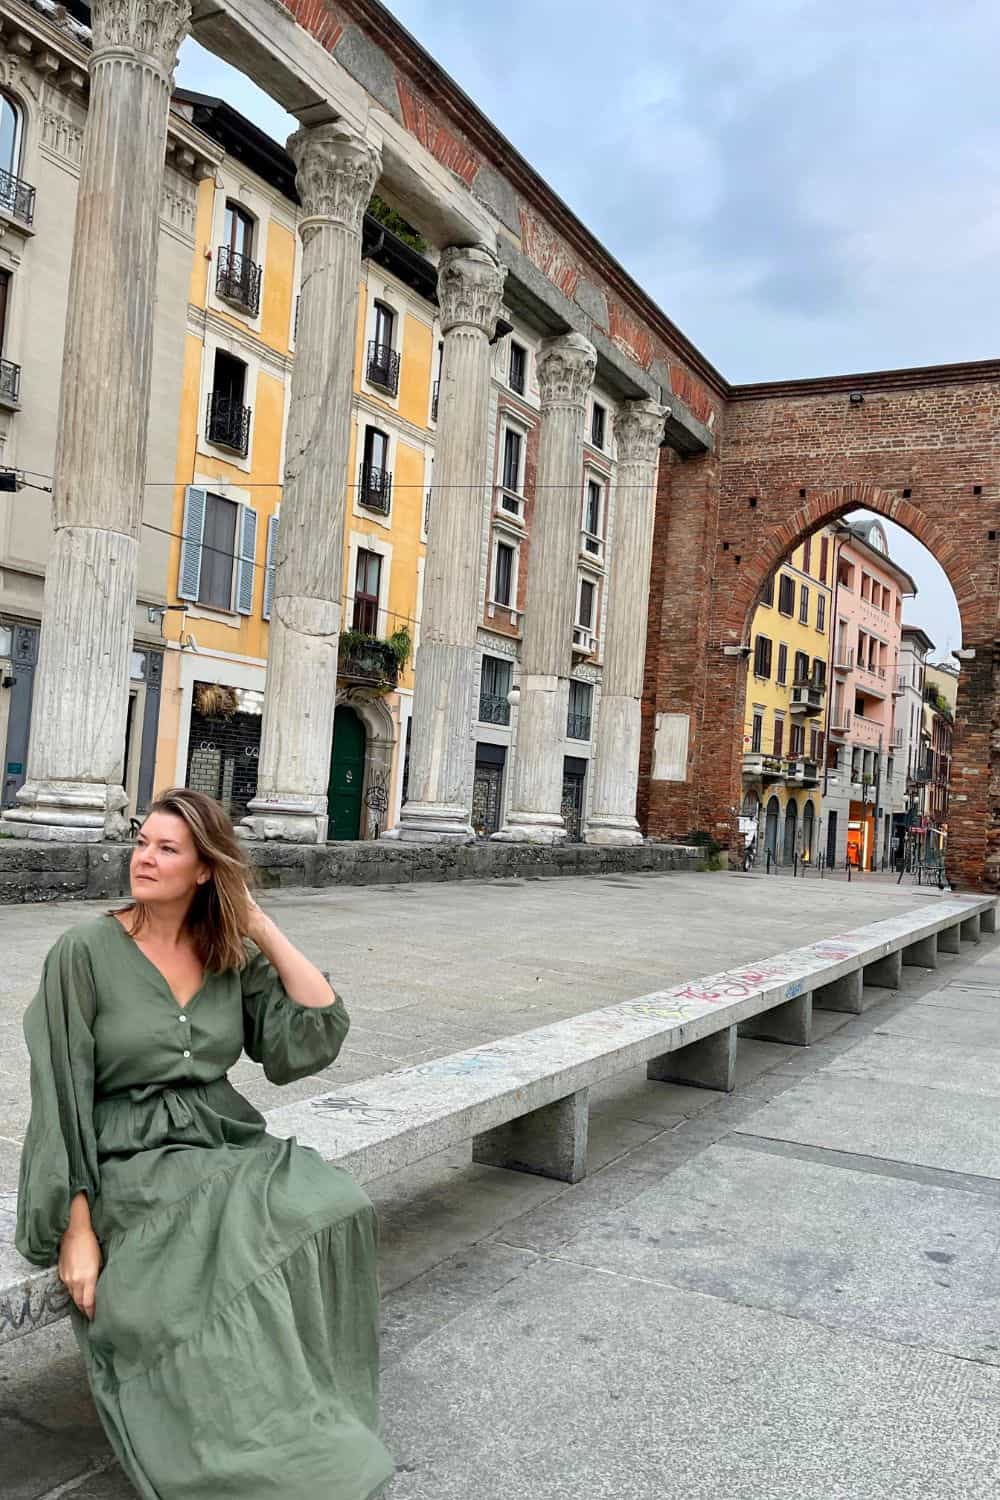 A woman in a green dress sits casually on a long stone bench in front of the ancient Columns of San Lorenzo in Milan. Behind her is a contrast of historic columns and vibrant modern buildings, embodying the blend of old and new in the city.